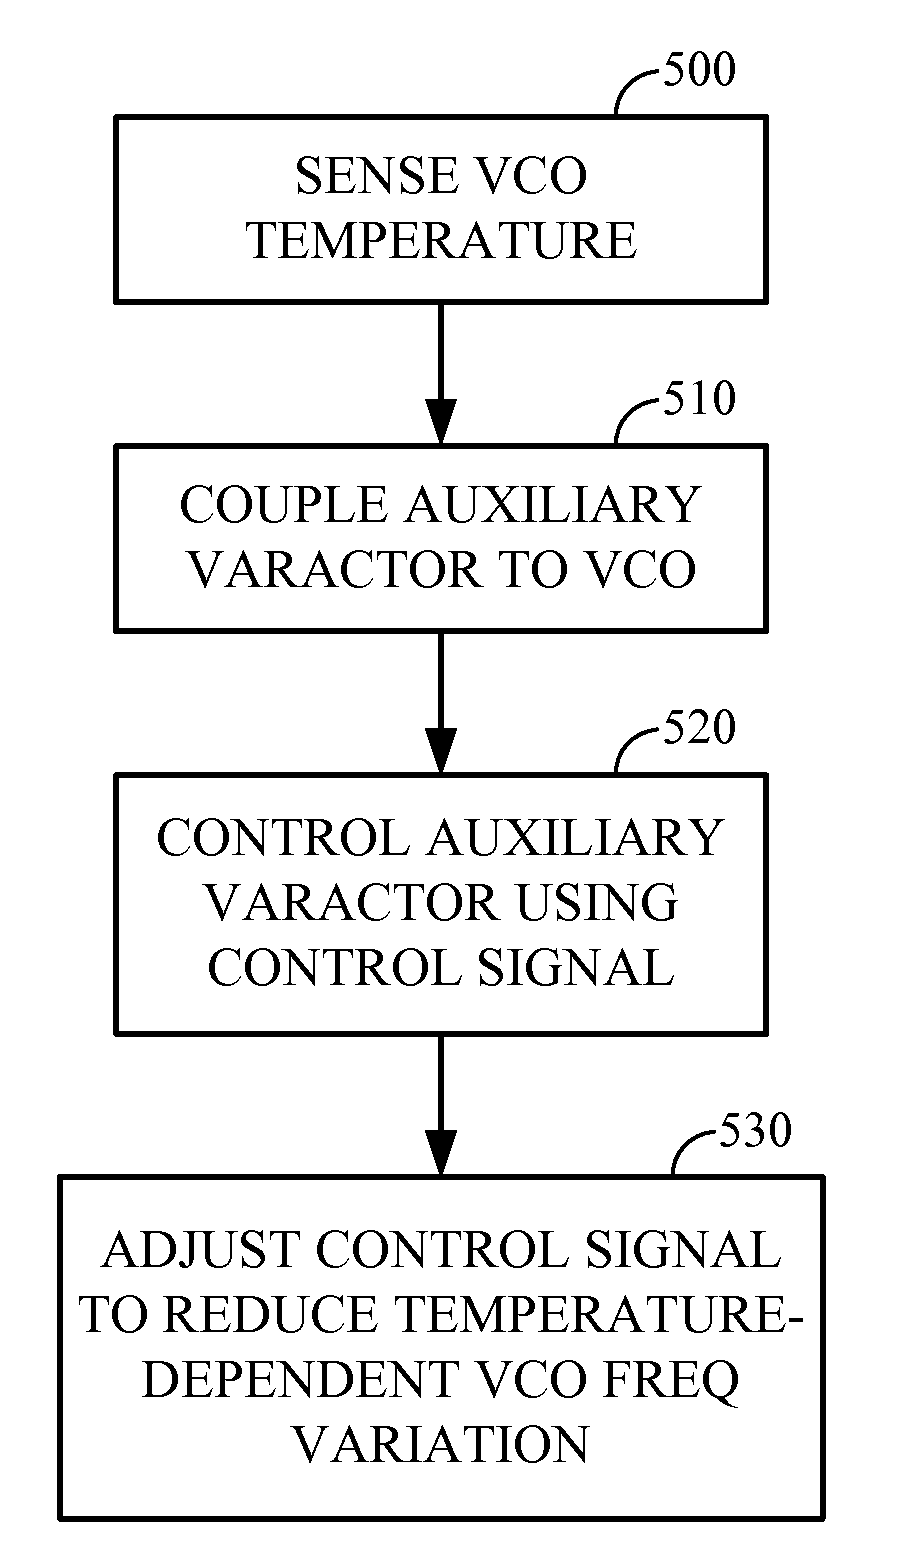 Auxiliary varactor for temperature compensation